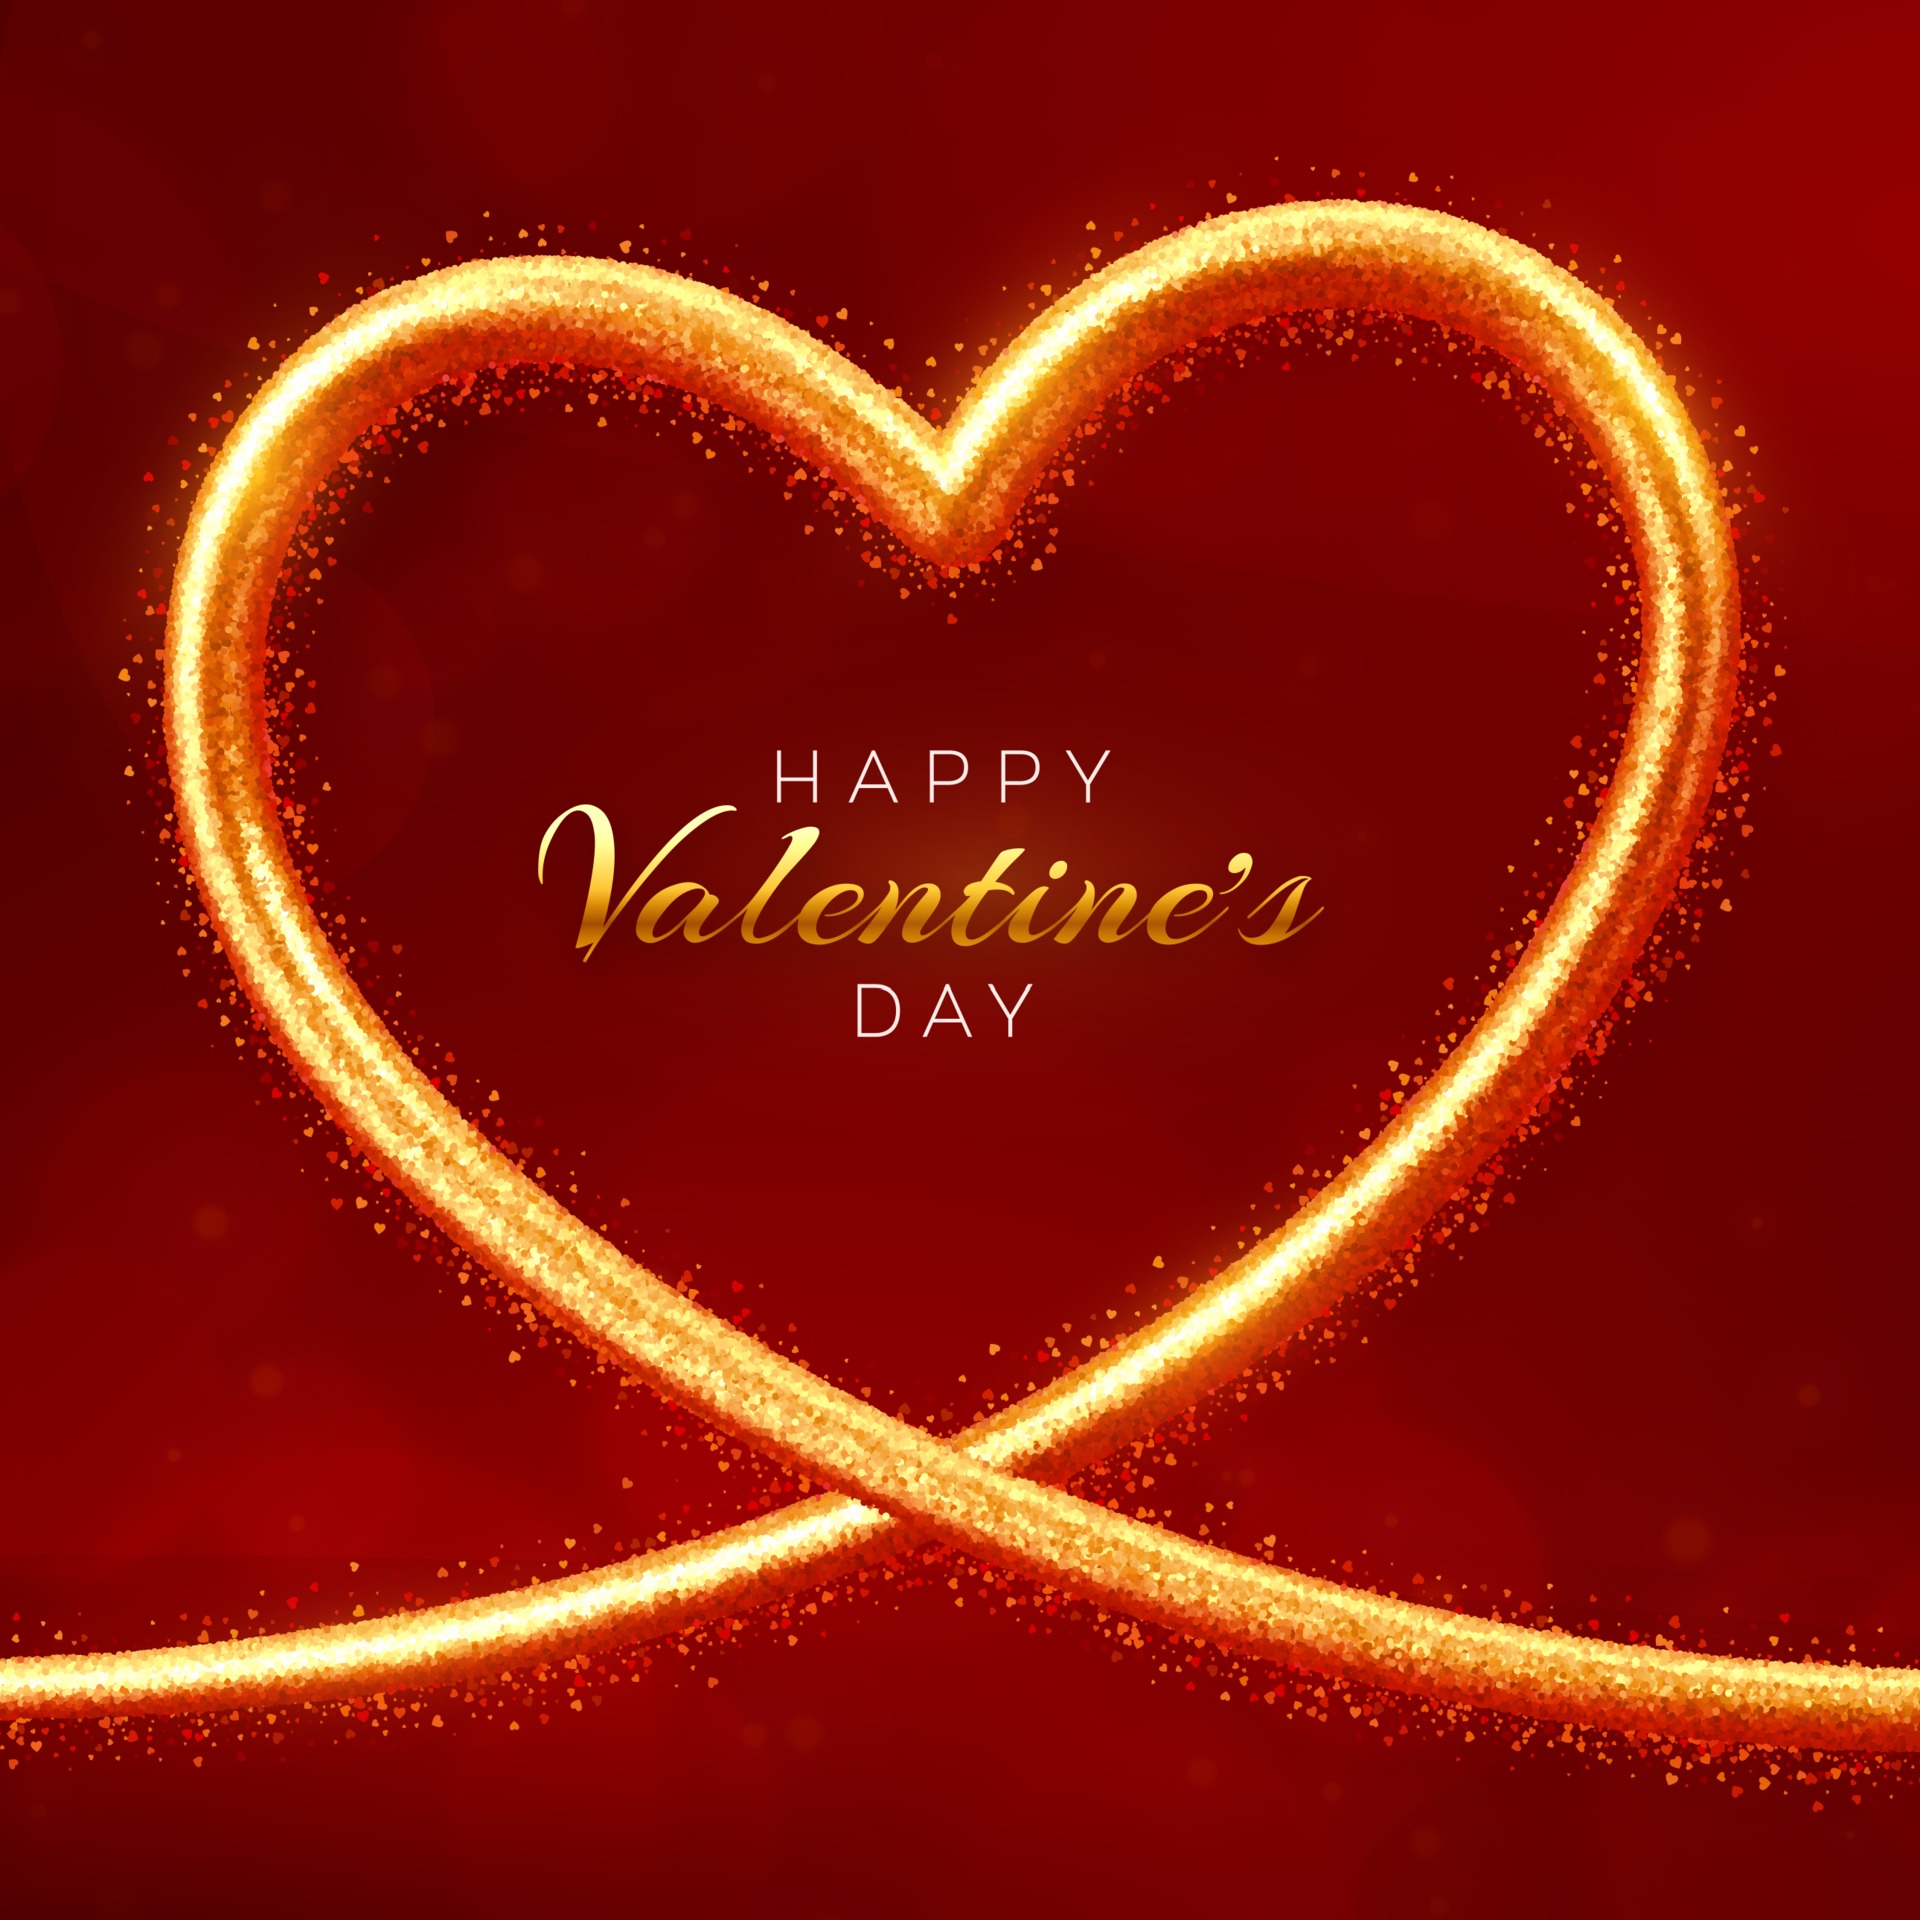 Happy Valentines day banner. 3D Realistic shining heart shaped golden frame with glitter texture. Wallpaper, flyer, poster, brochure, greeting card